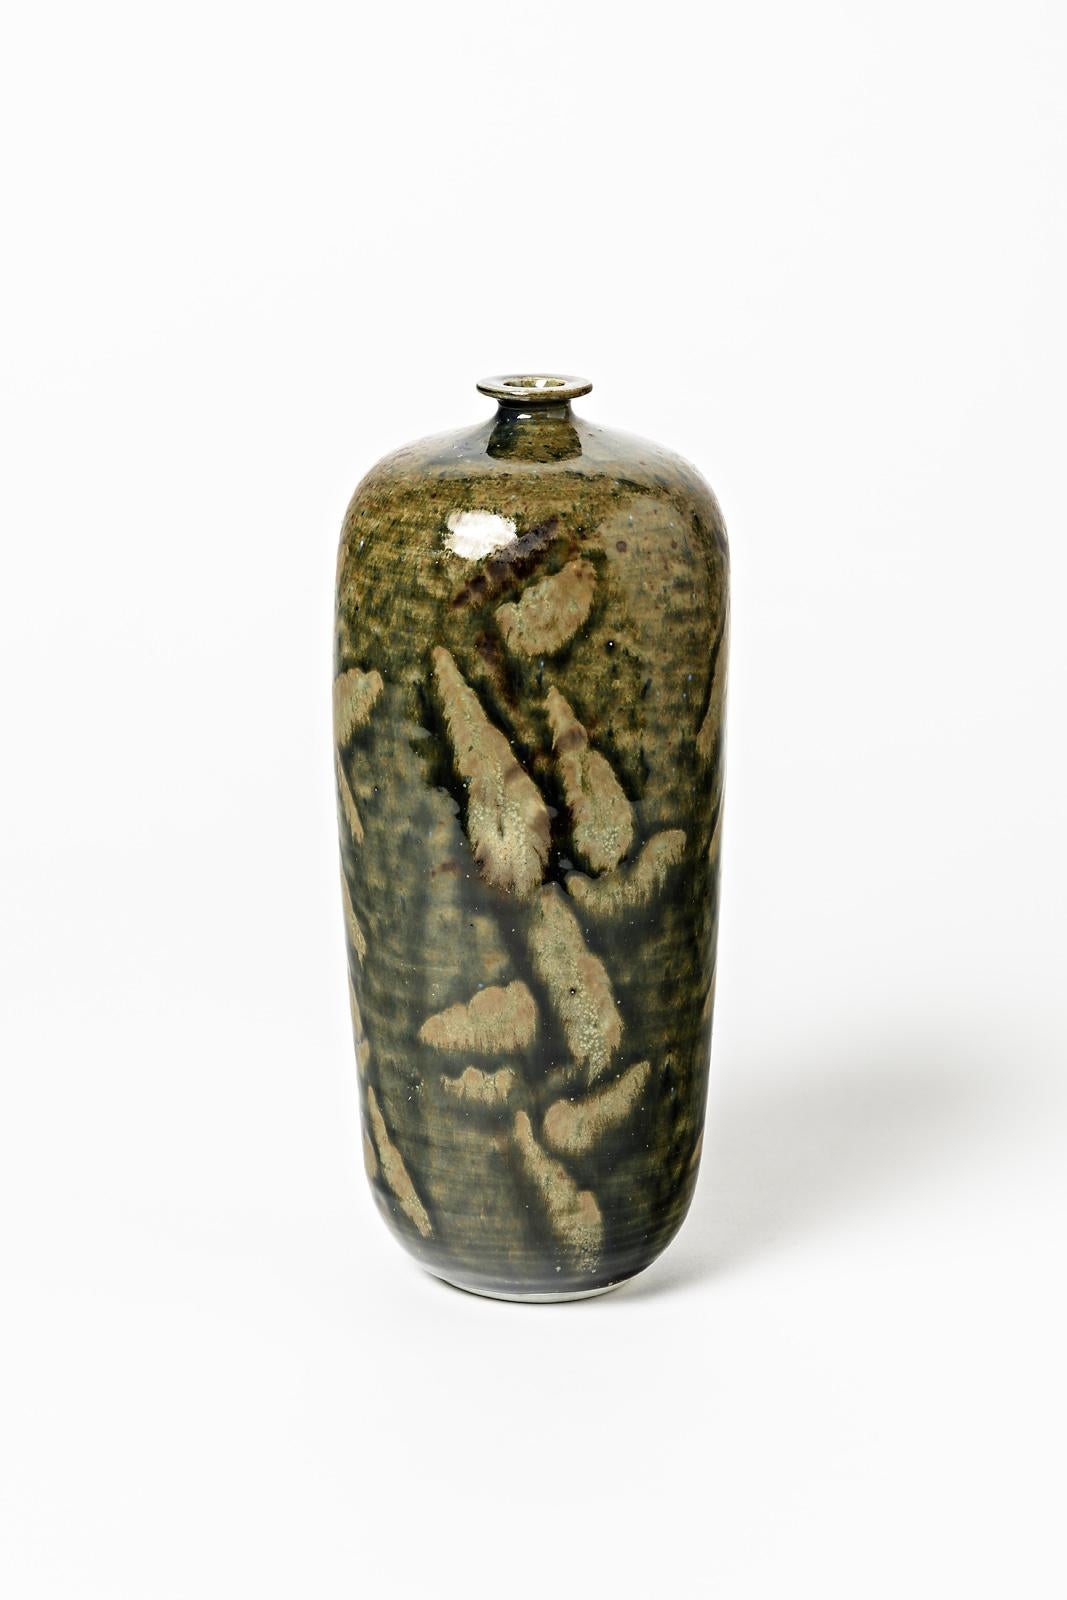 Robert Héraud and Annie Maume

Realised in La Borne circa 1970

Elegant porcelain ceramic bottle with abstract brown and green ceramic glazes colors.

Original perfect conditions

Signed under the base

Measures: Height 23cm, large 9cm.